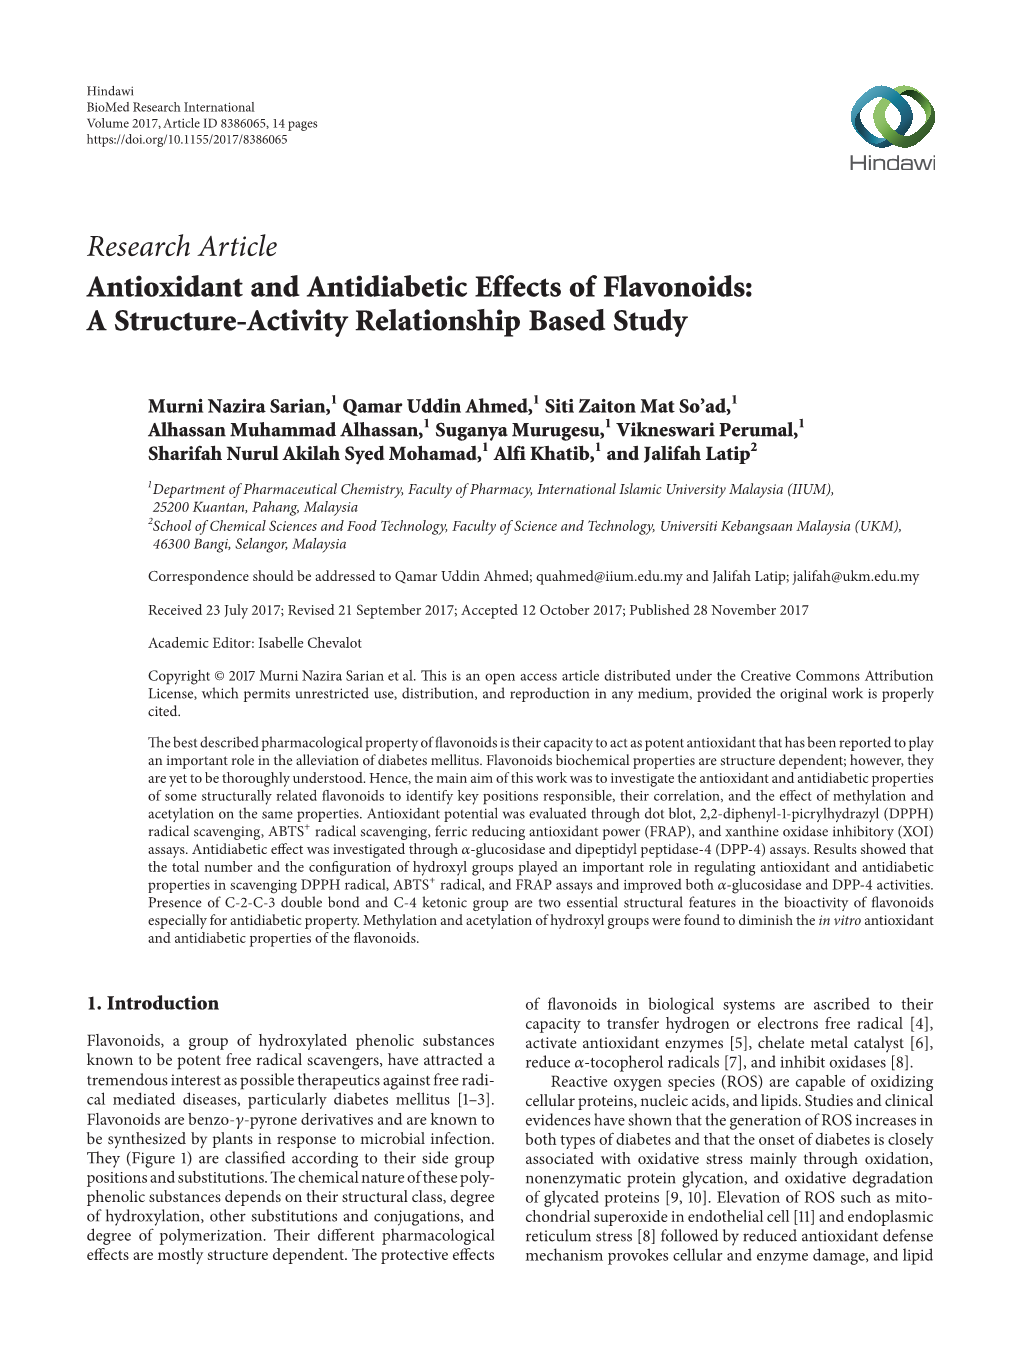 Research Article Antioxidant and Antidiabetic Effects of Flavonoids: a Structure-Activity Relationship Based Study